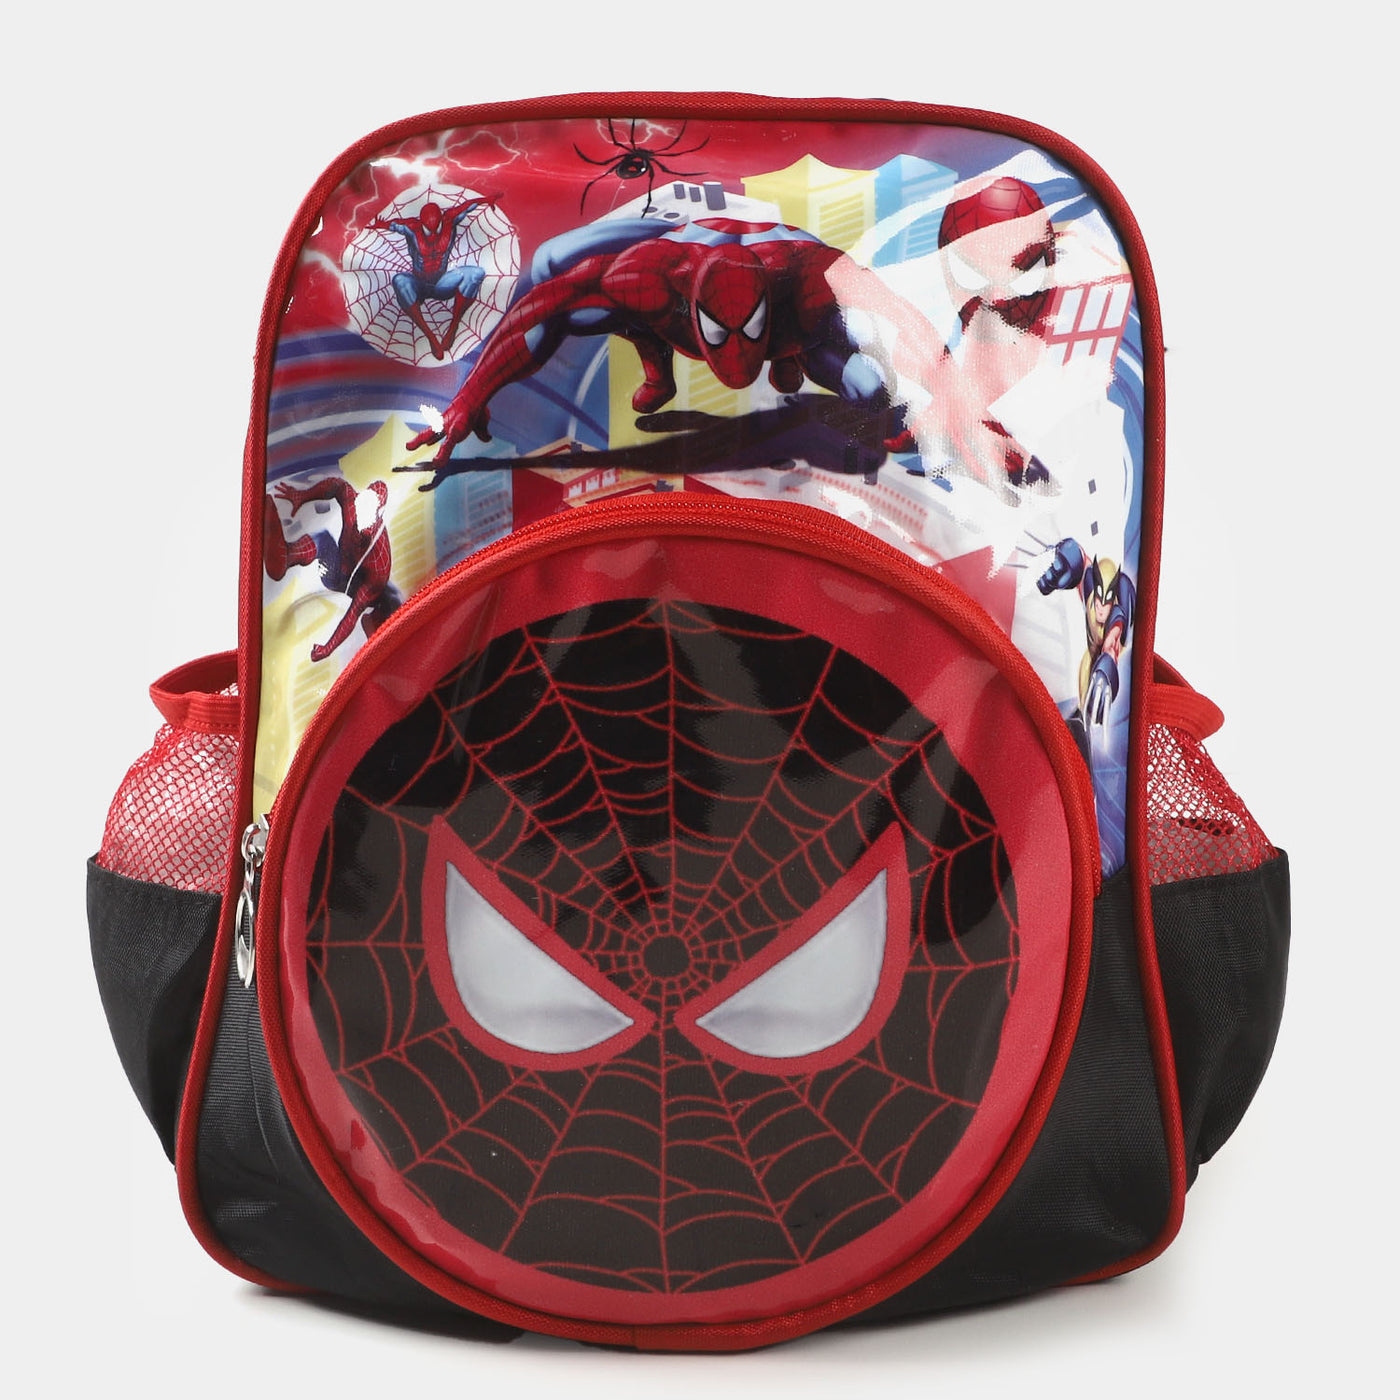 CHARACTER SCHOOL BACKPACK FOR KIDS